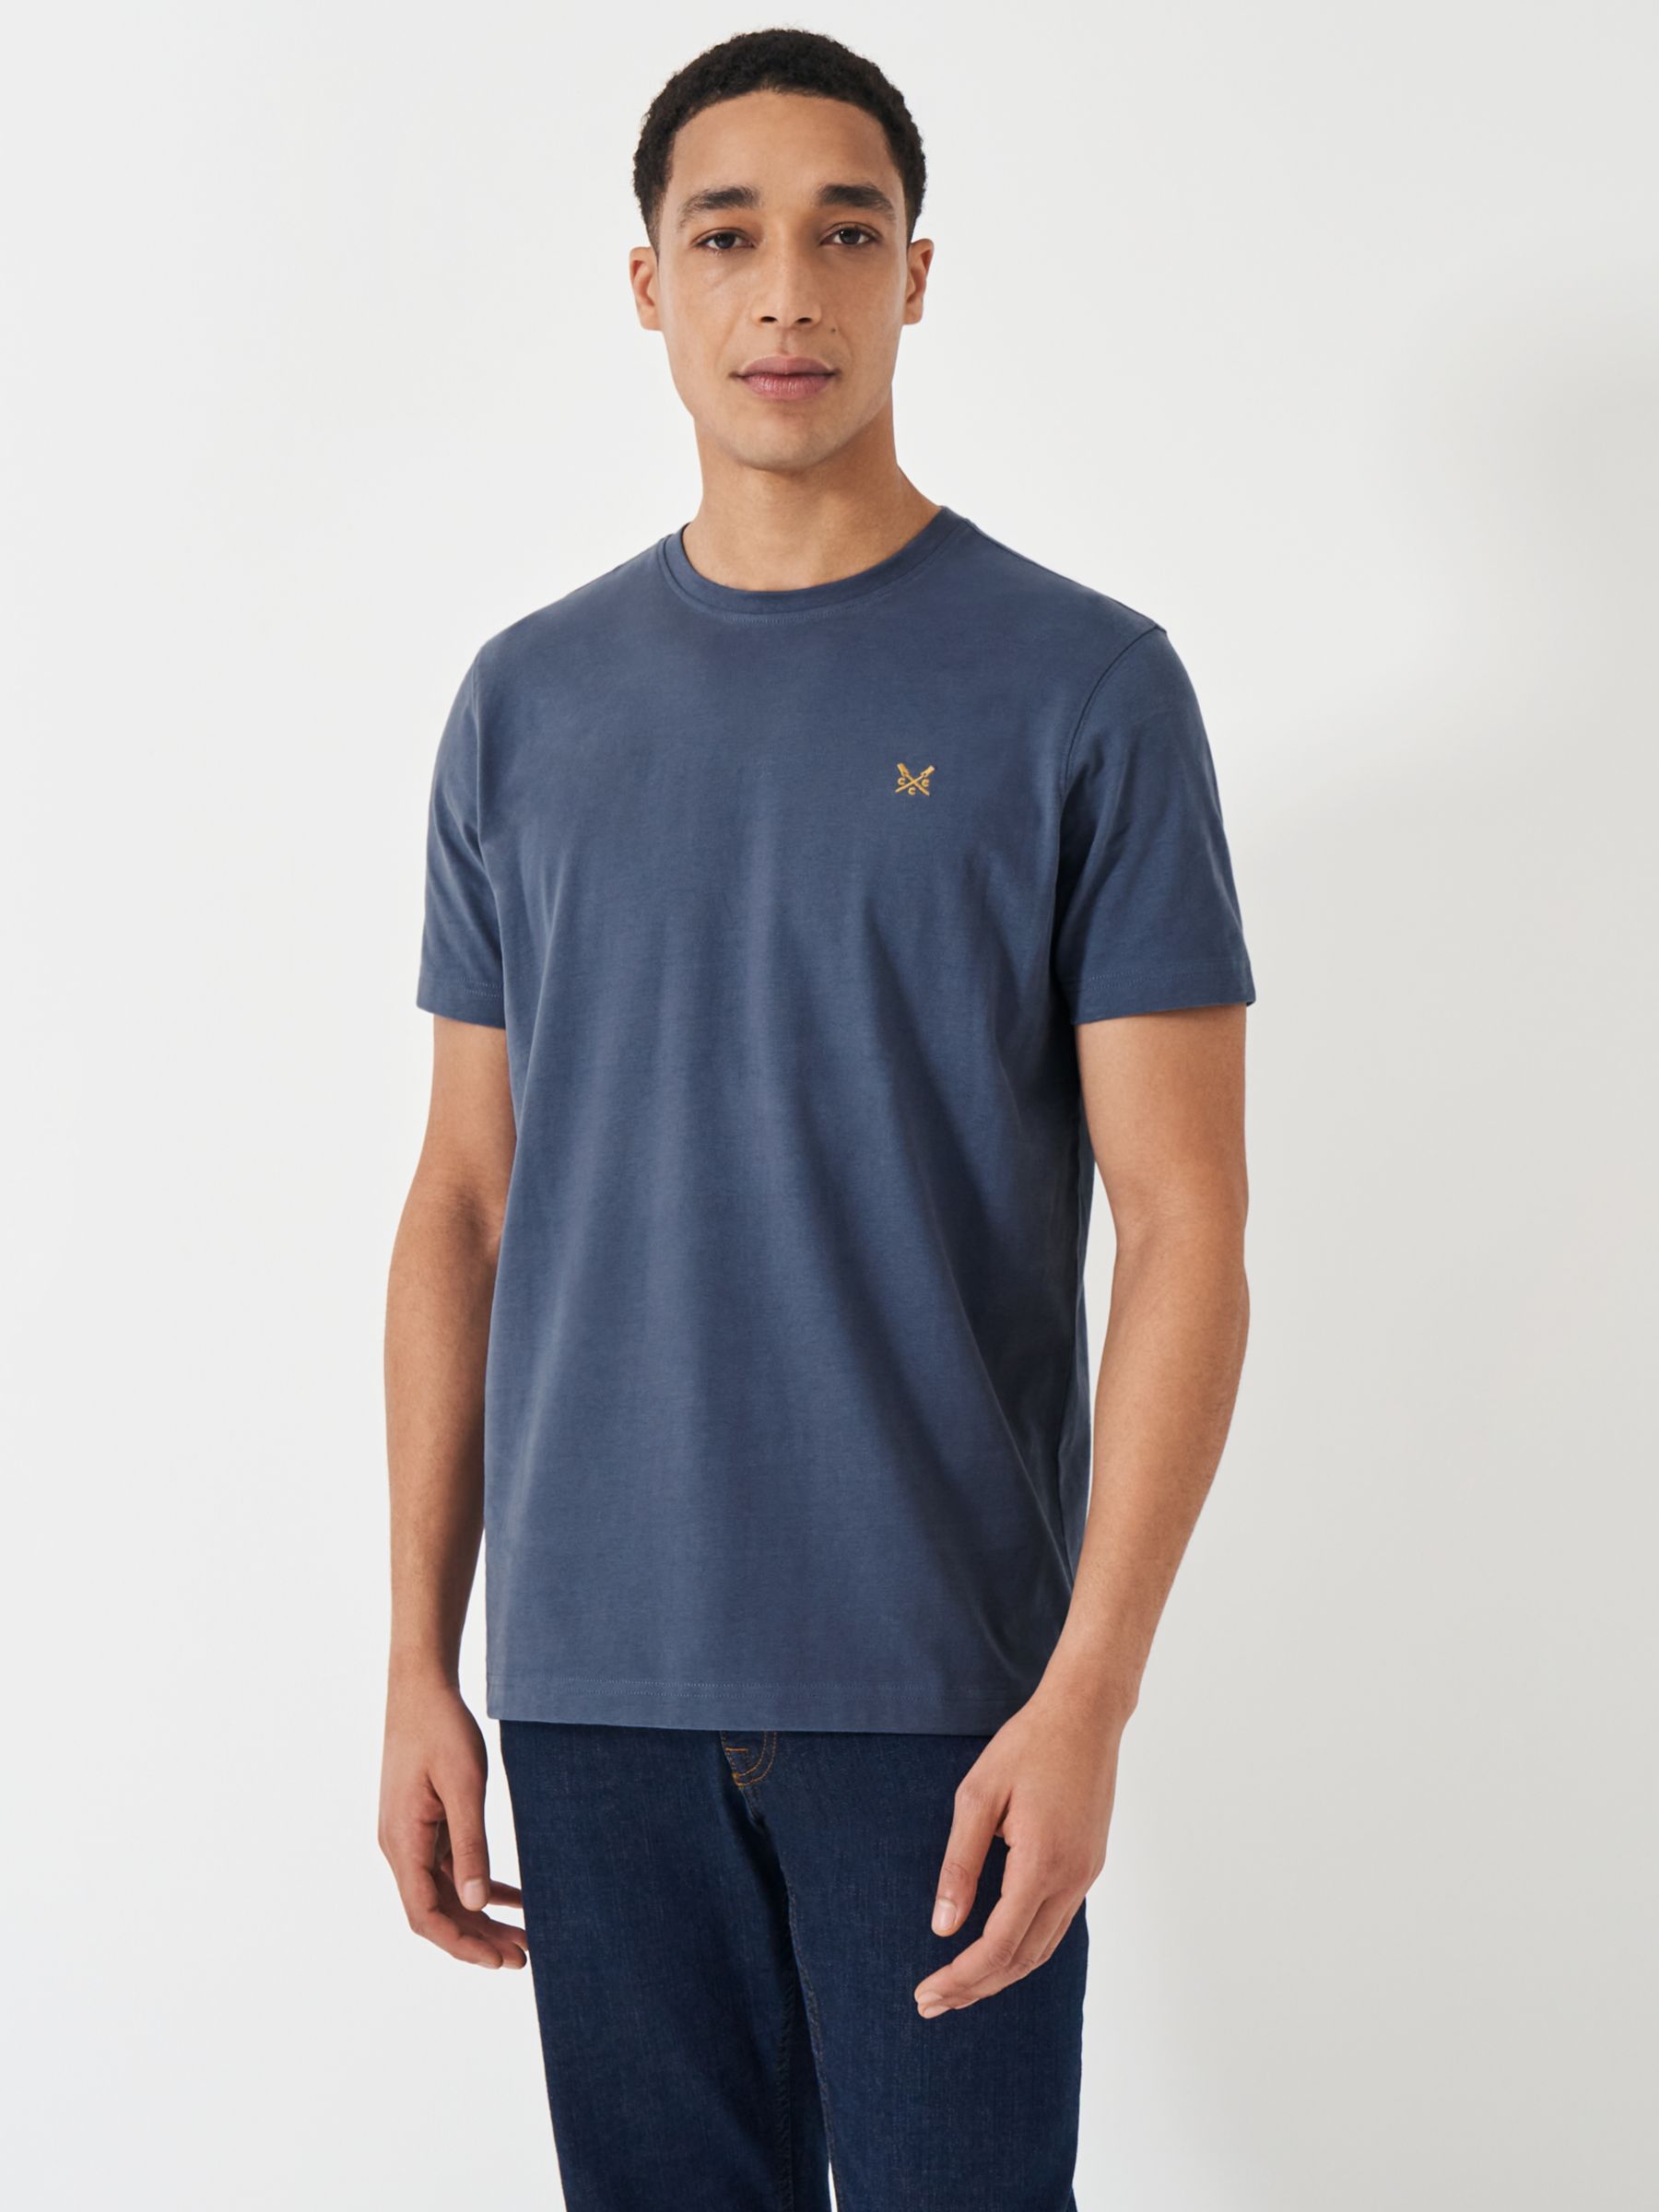 Crew Clothing Classic Cotton Jersey T-Shirt, Mid Blue, L